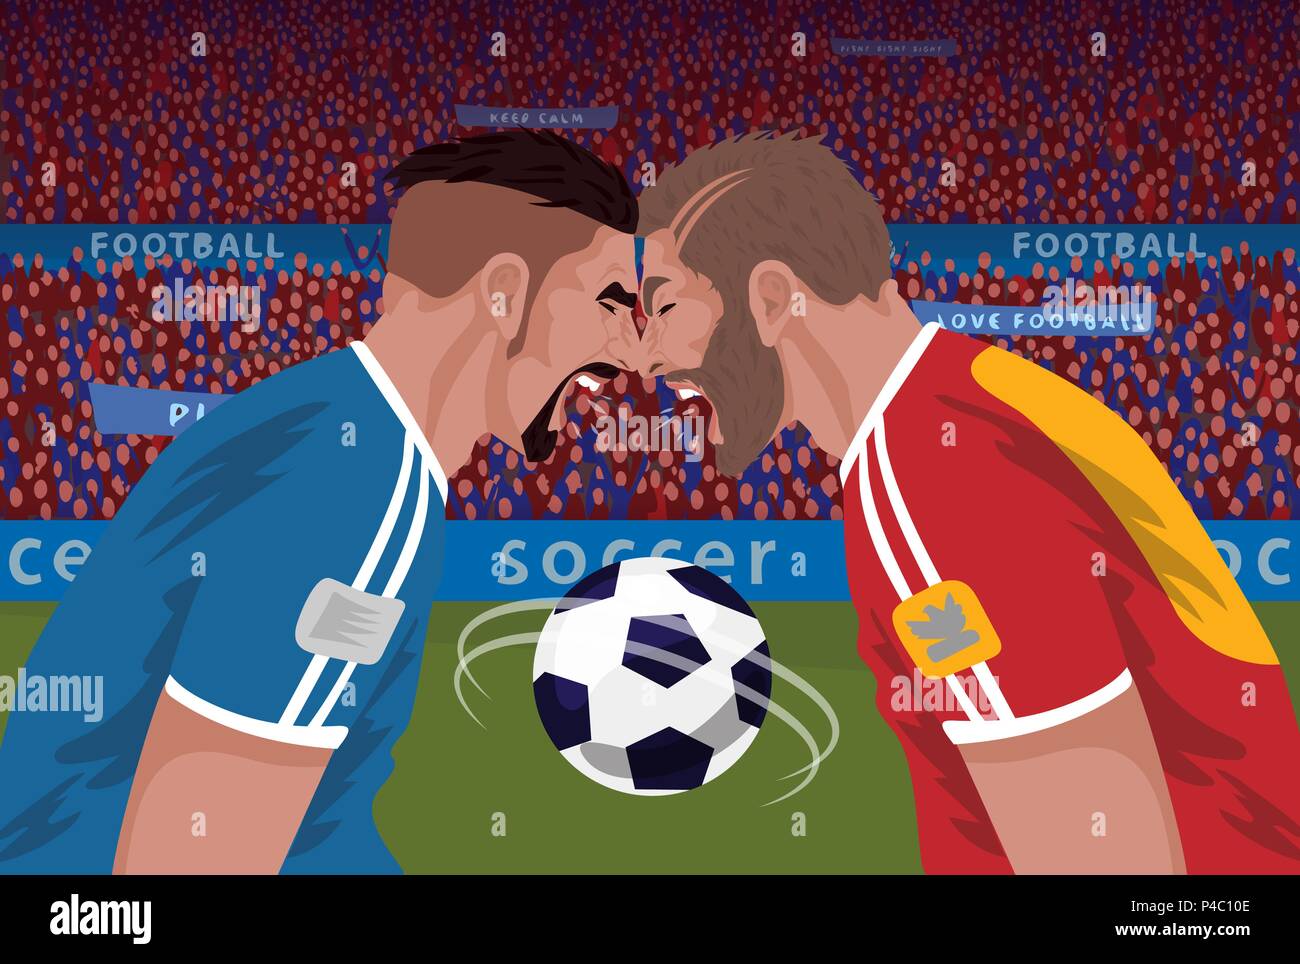 Two soccer players Royalty Free Vector Image - VectorStock